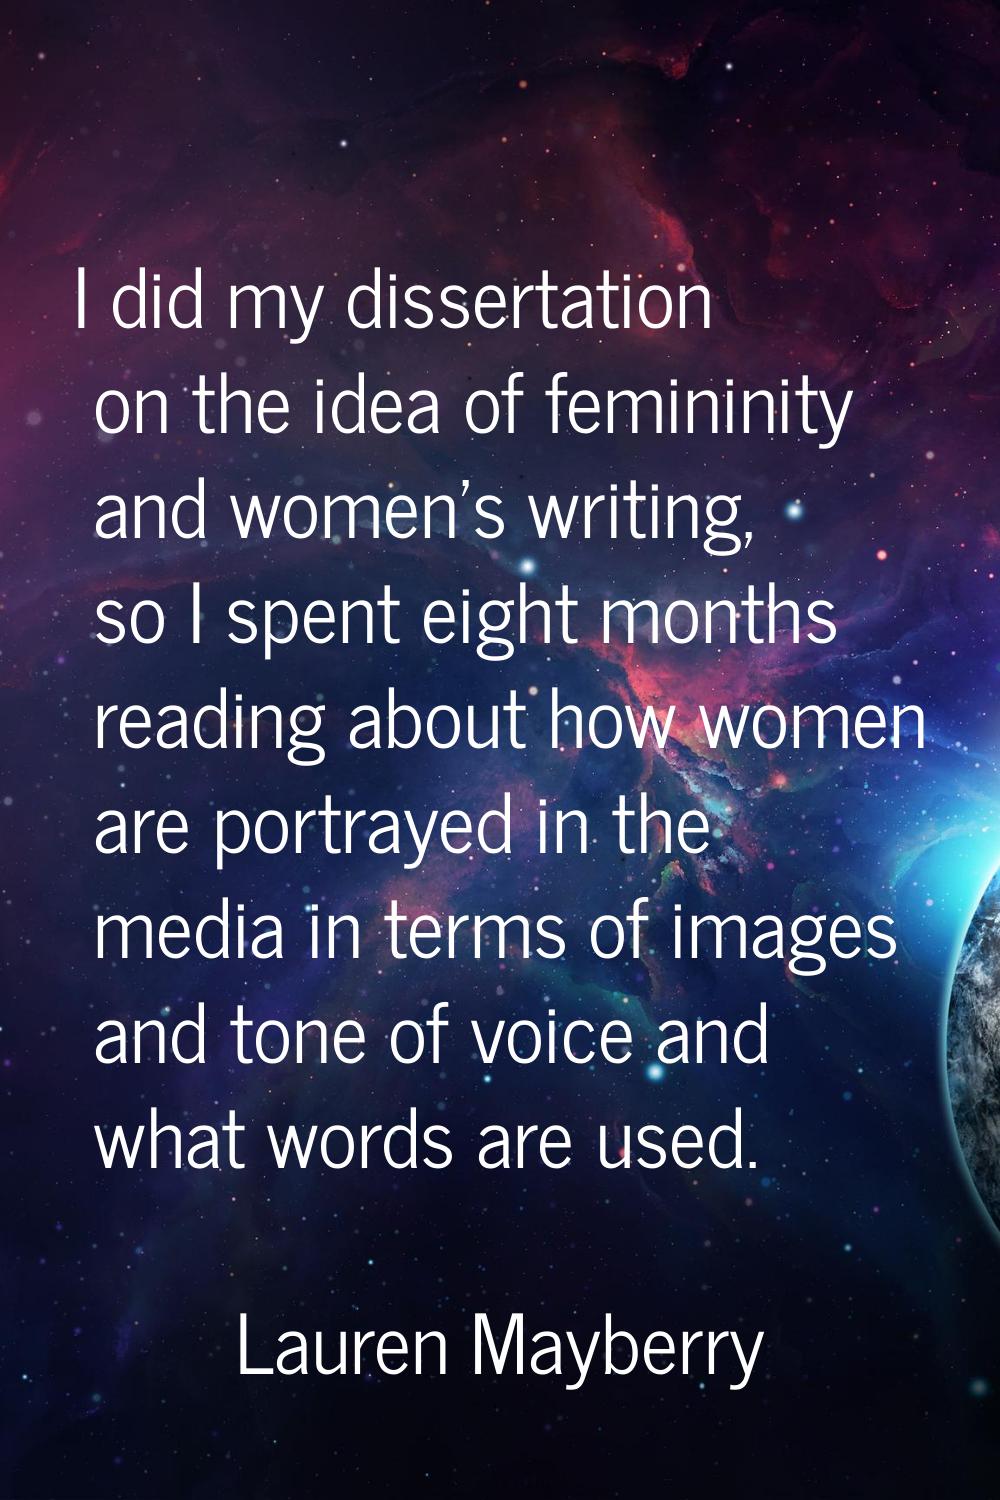 I did my dissertation on the idea of femininity and women's writing, so I spent eight months readin